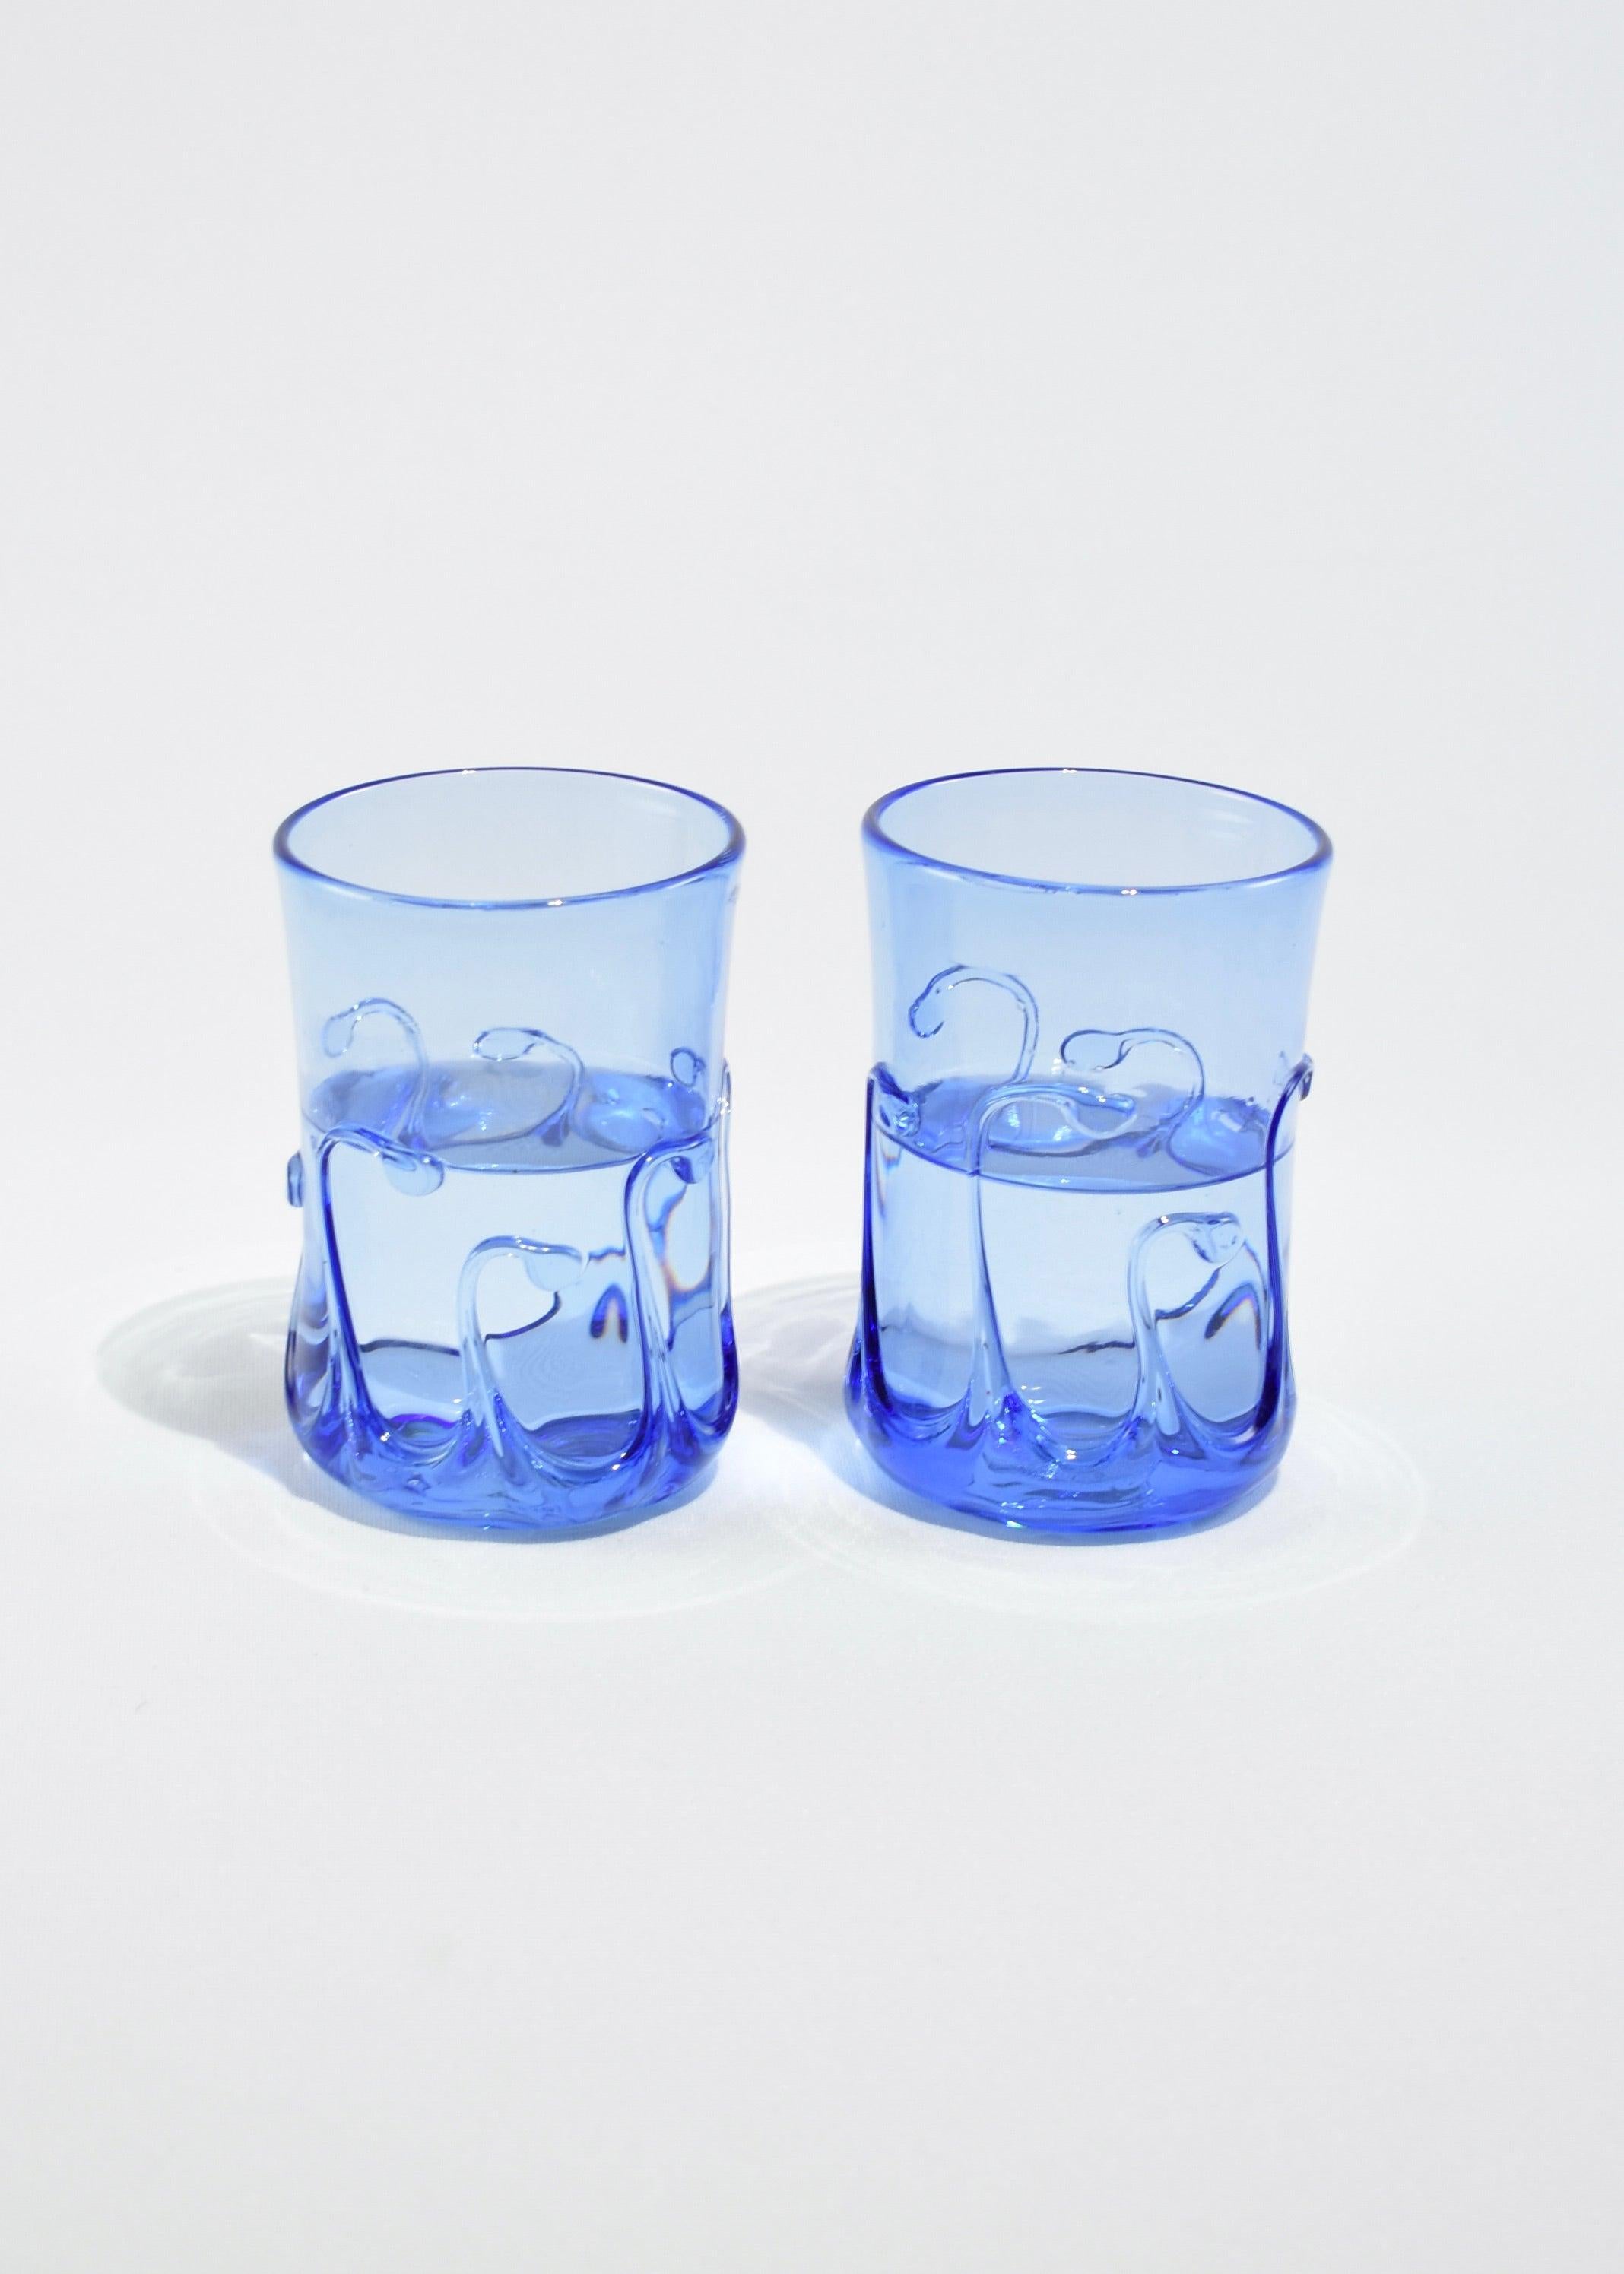 Vintage blown glass tumbler set in cobalt blue with abstract droplet design, set of two. Signed on base.